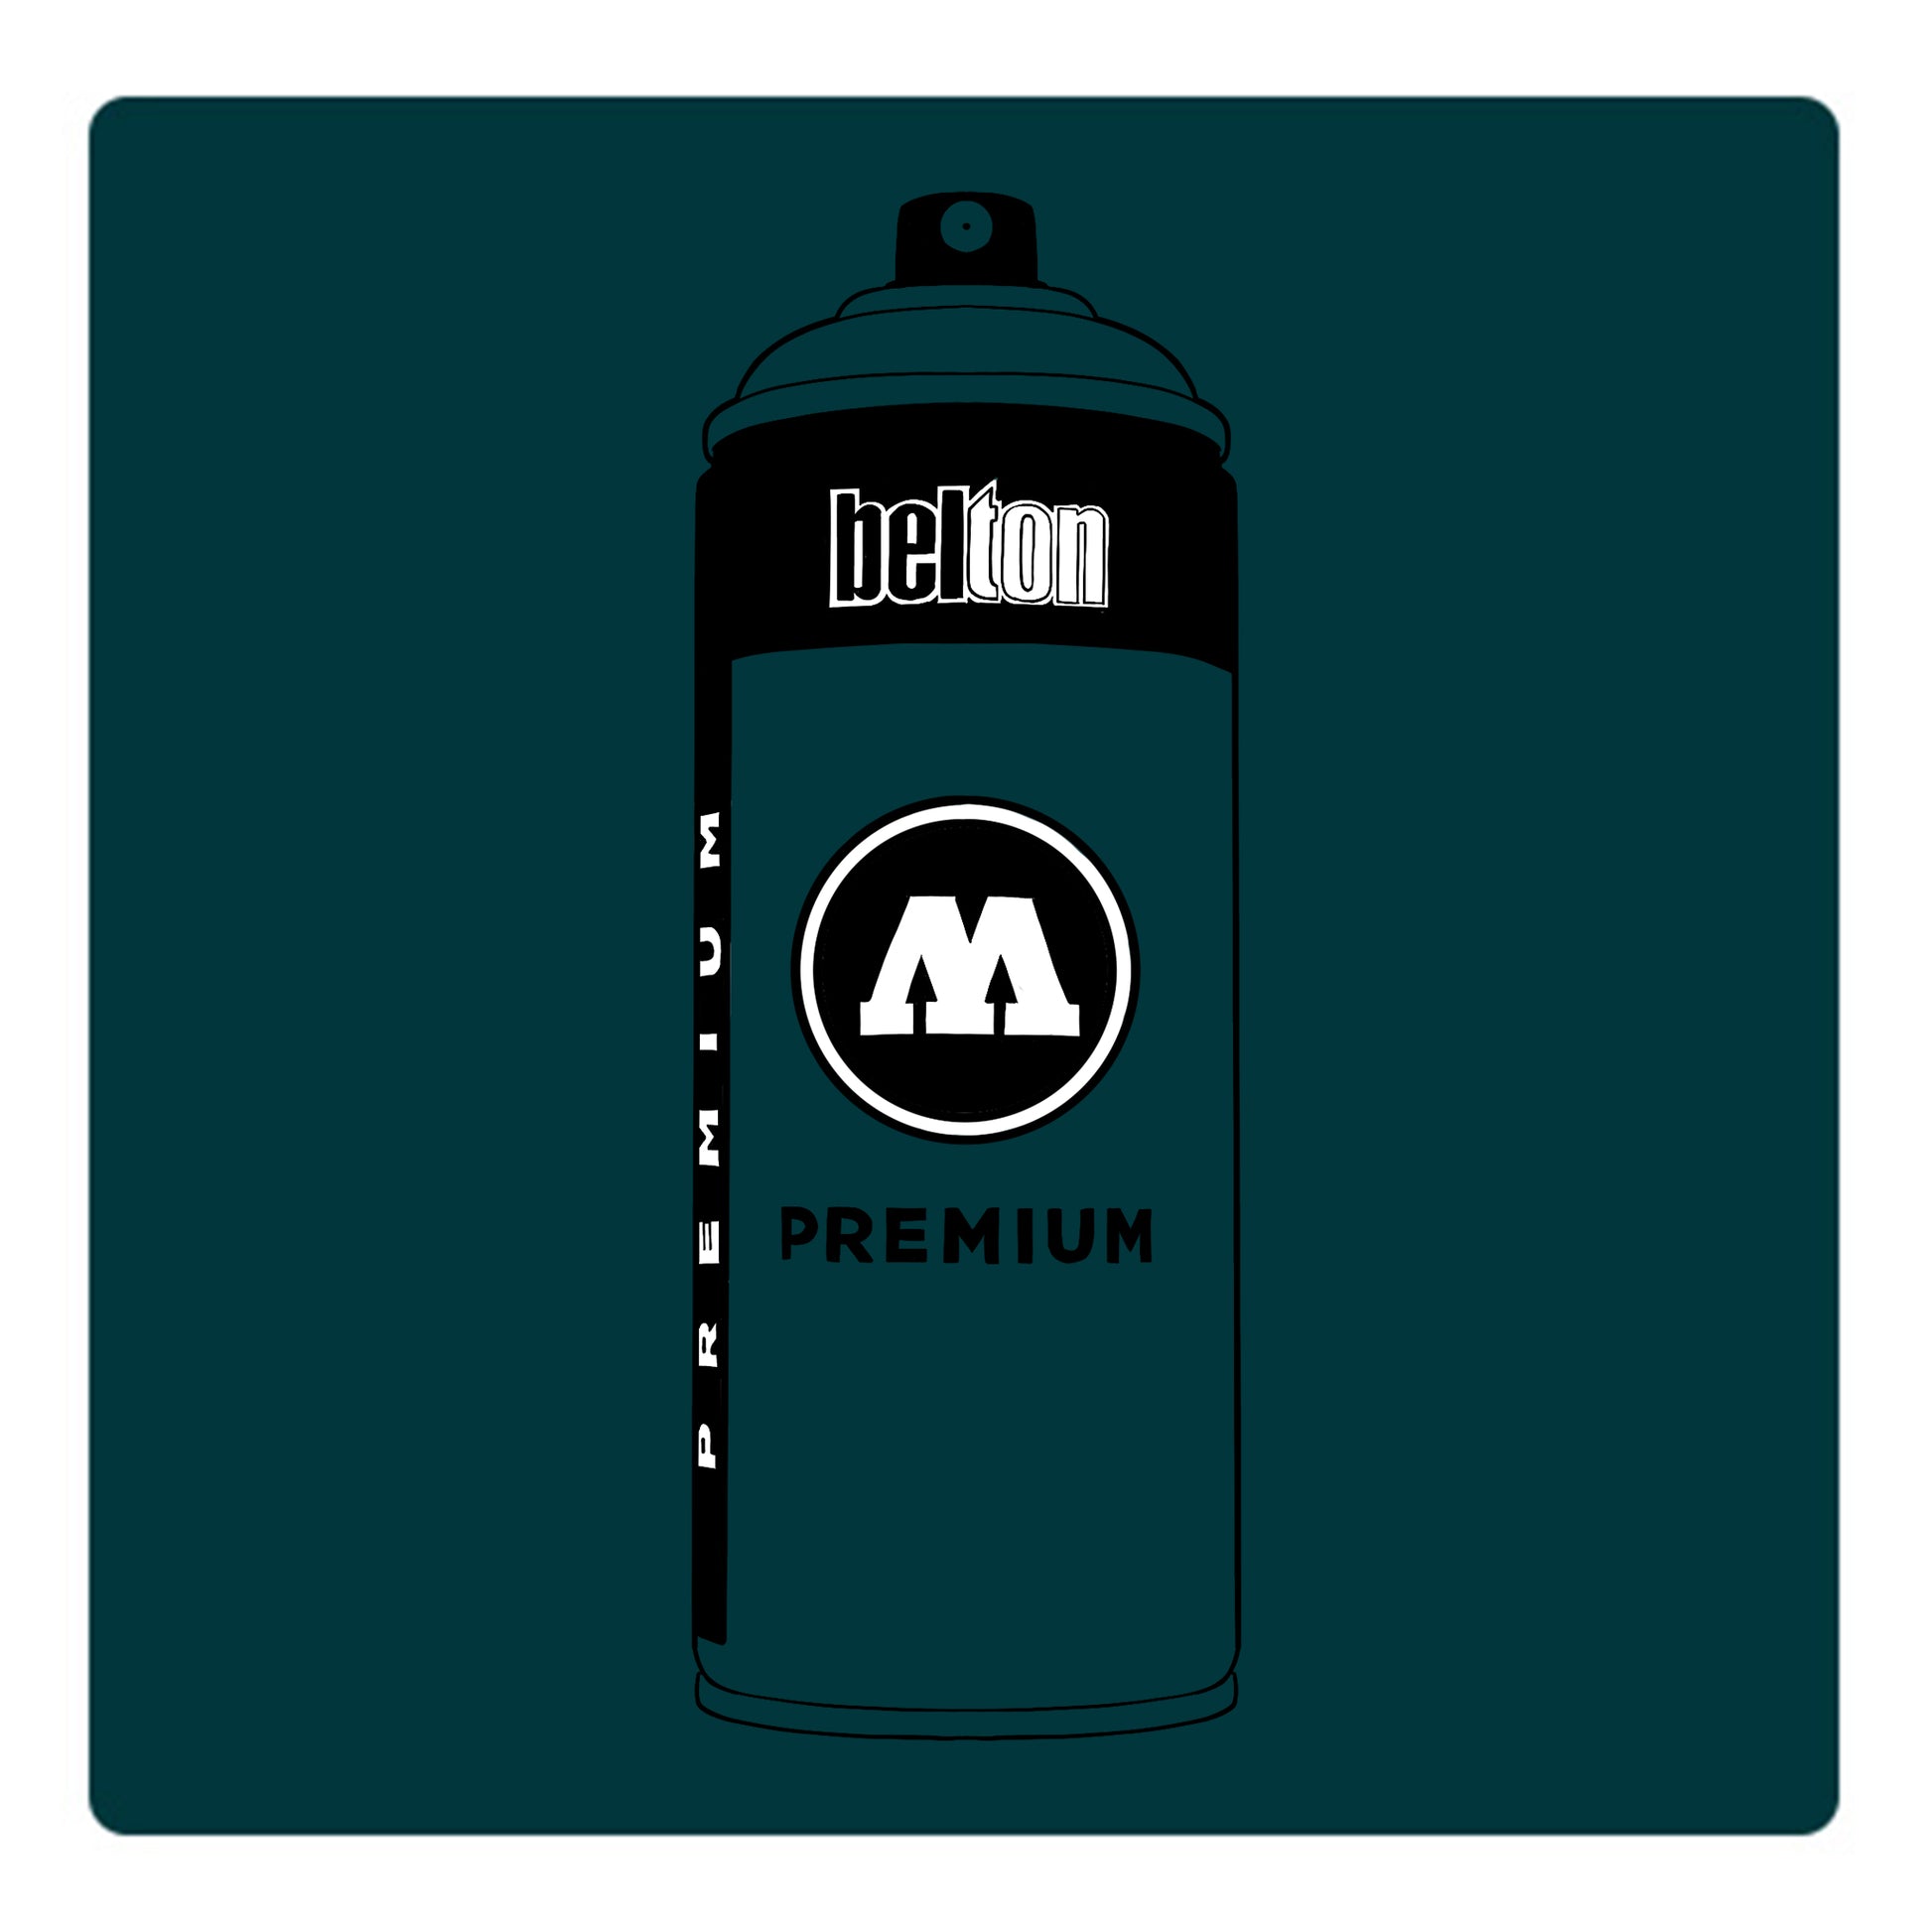 A black outline drawing of a dark peacock blue spray paint can with the words "belton","premium" and the letter"M" written on the face in black and white font. The background is a color swatch of the same dark peacock blue with a white border